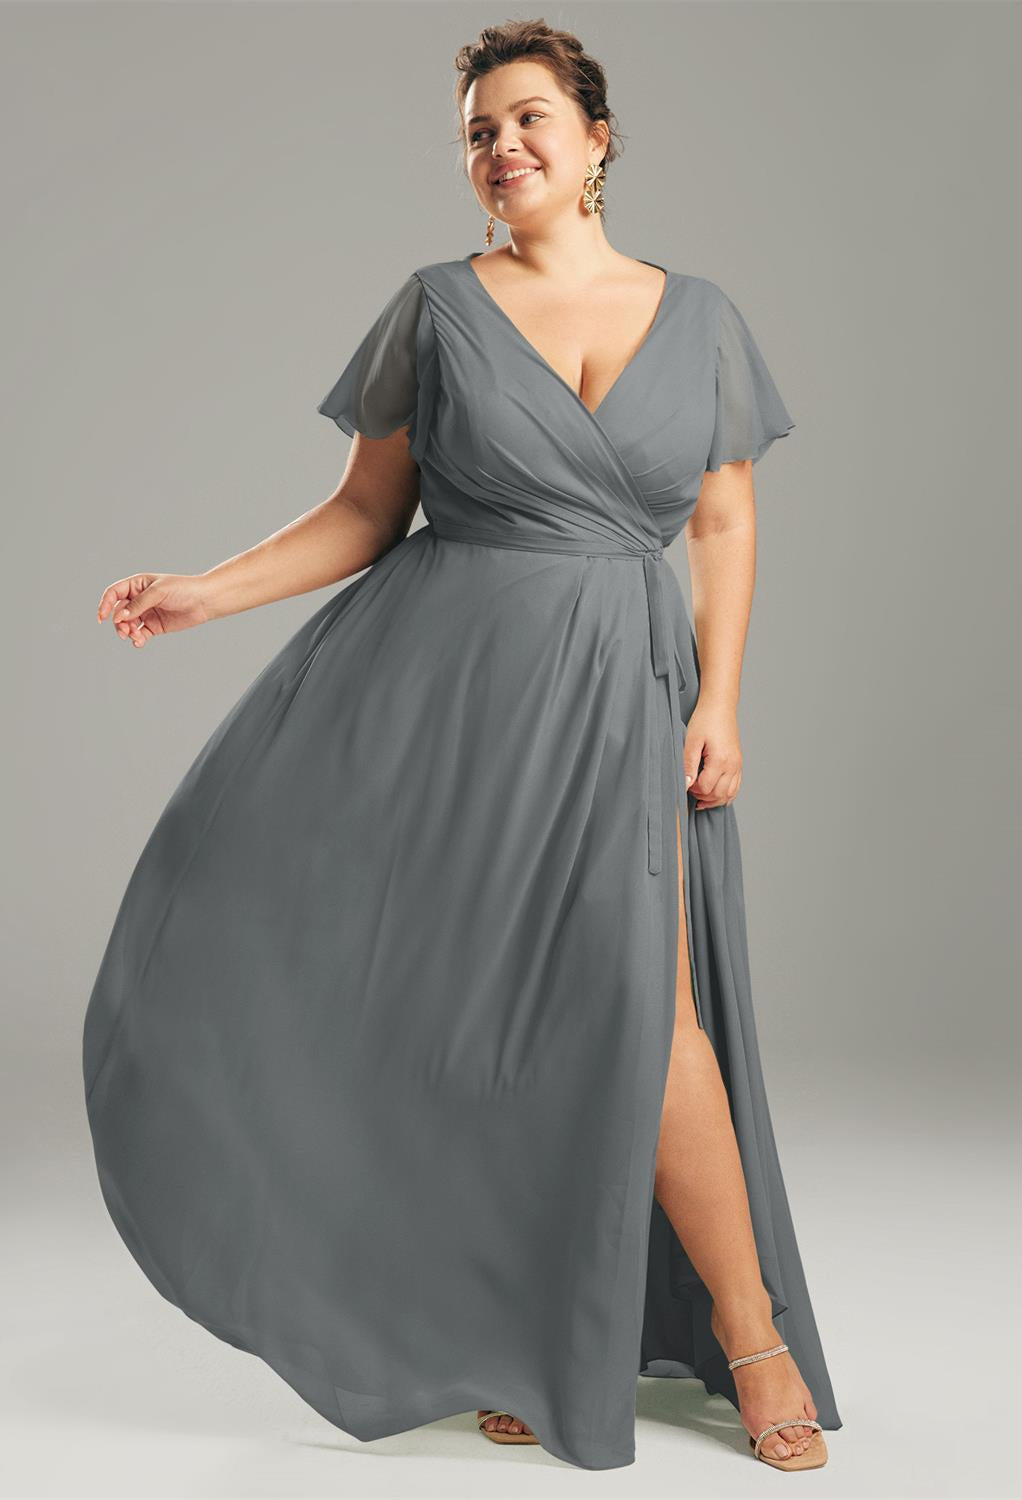 An Ellison - Chiffon Bridesmaid Dress - Off The Rack with a split slit is available at Bergamot Bridal, a bridal shop in London.